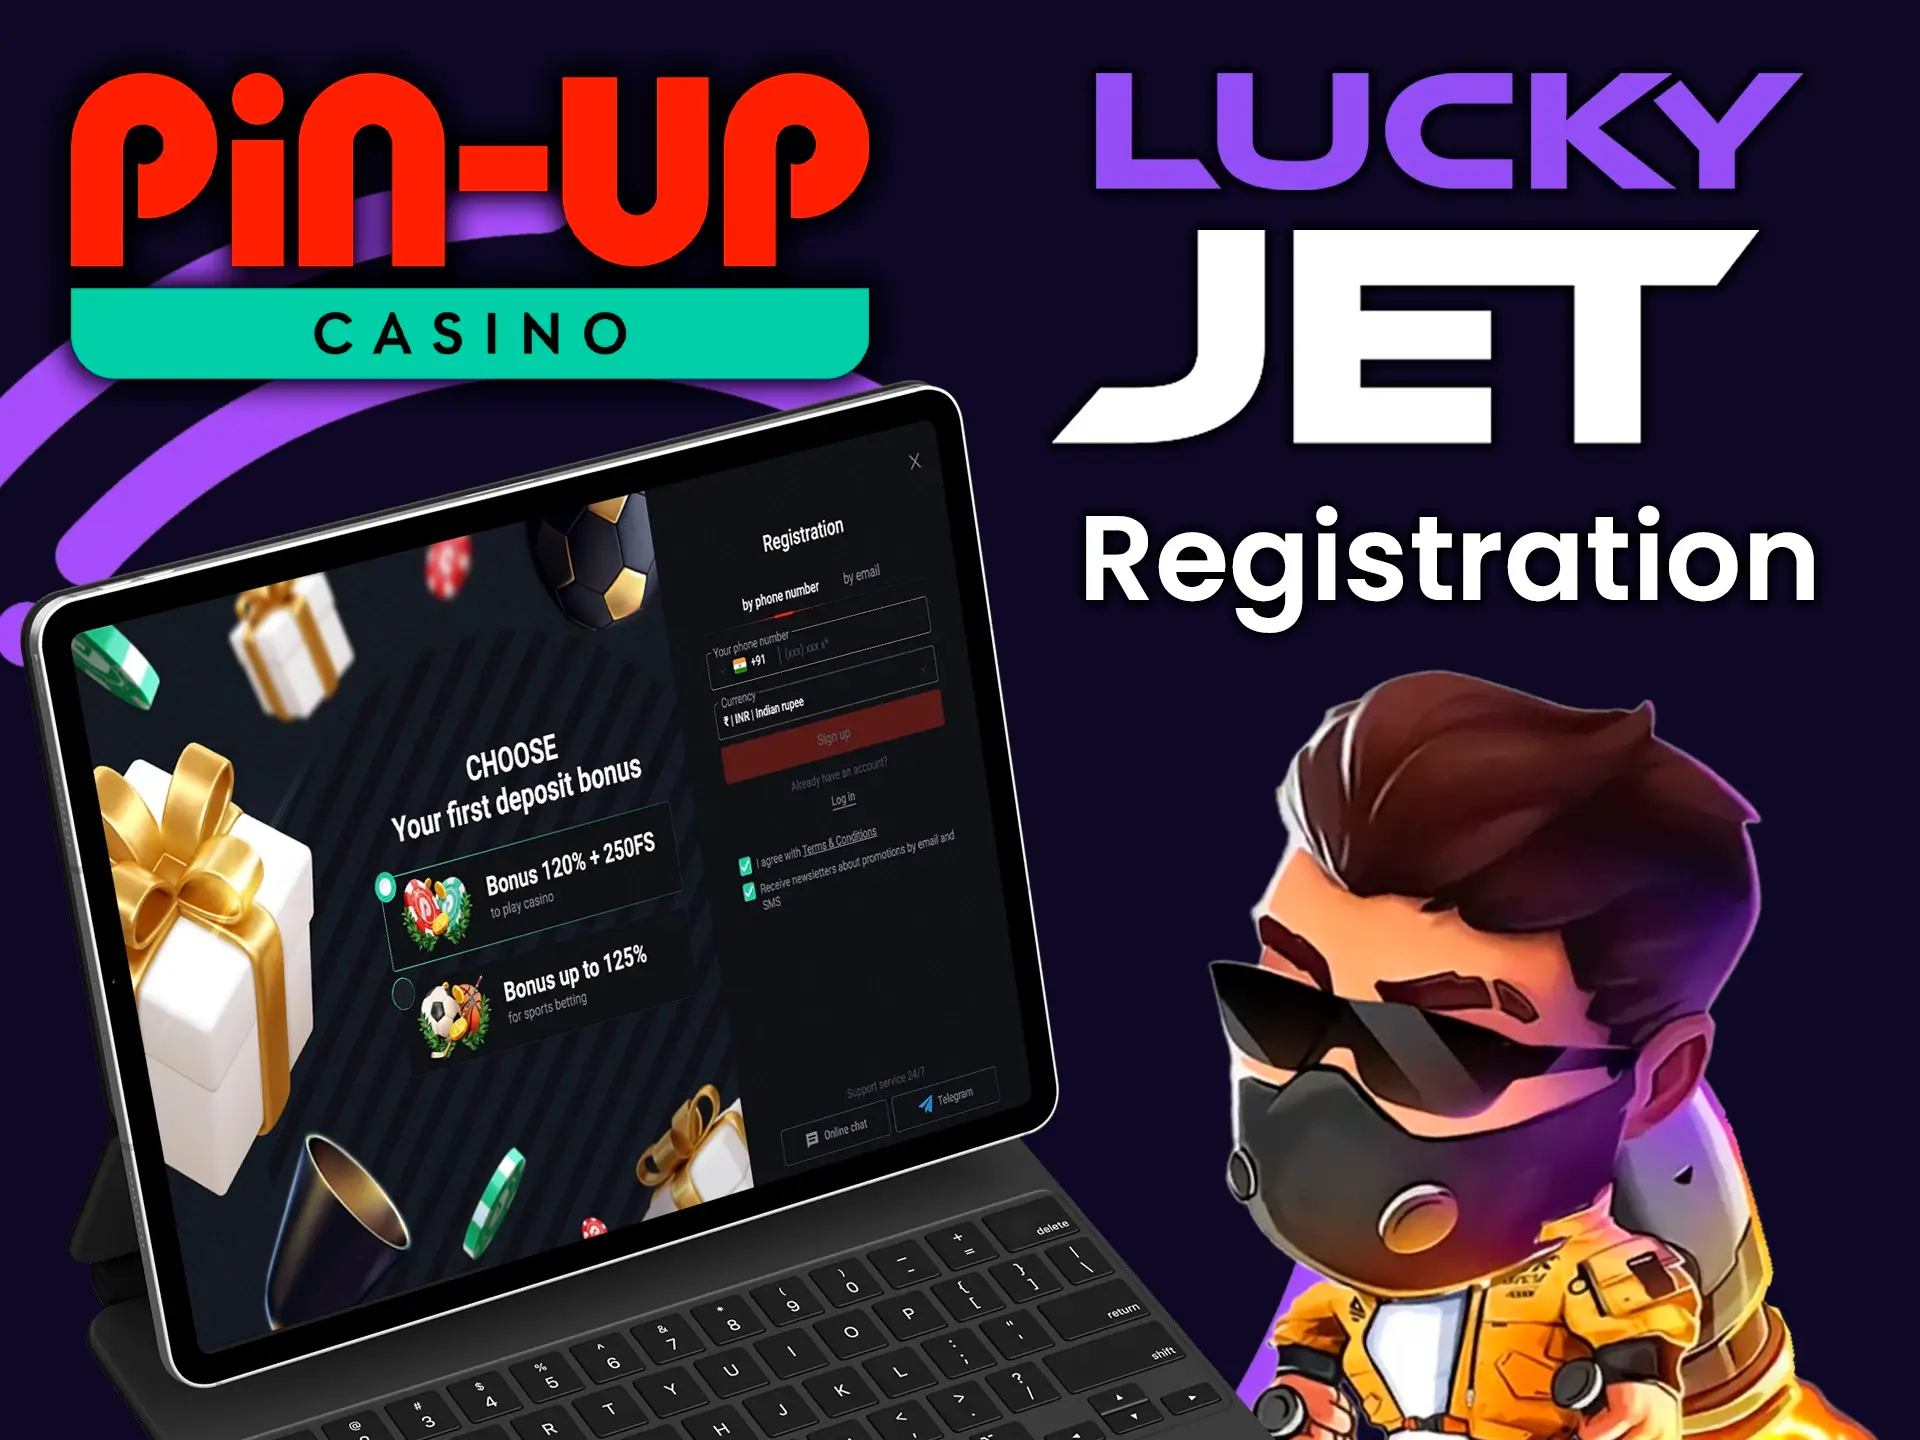 By going through the registration process on Pin Up you will be able to play Lucky Jet.